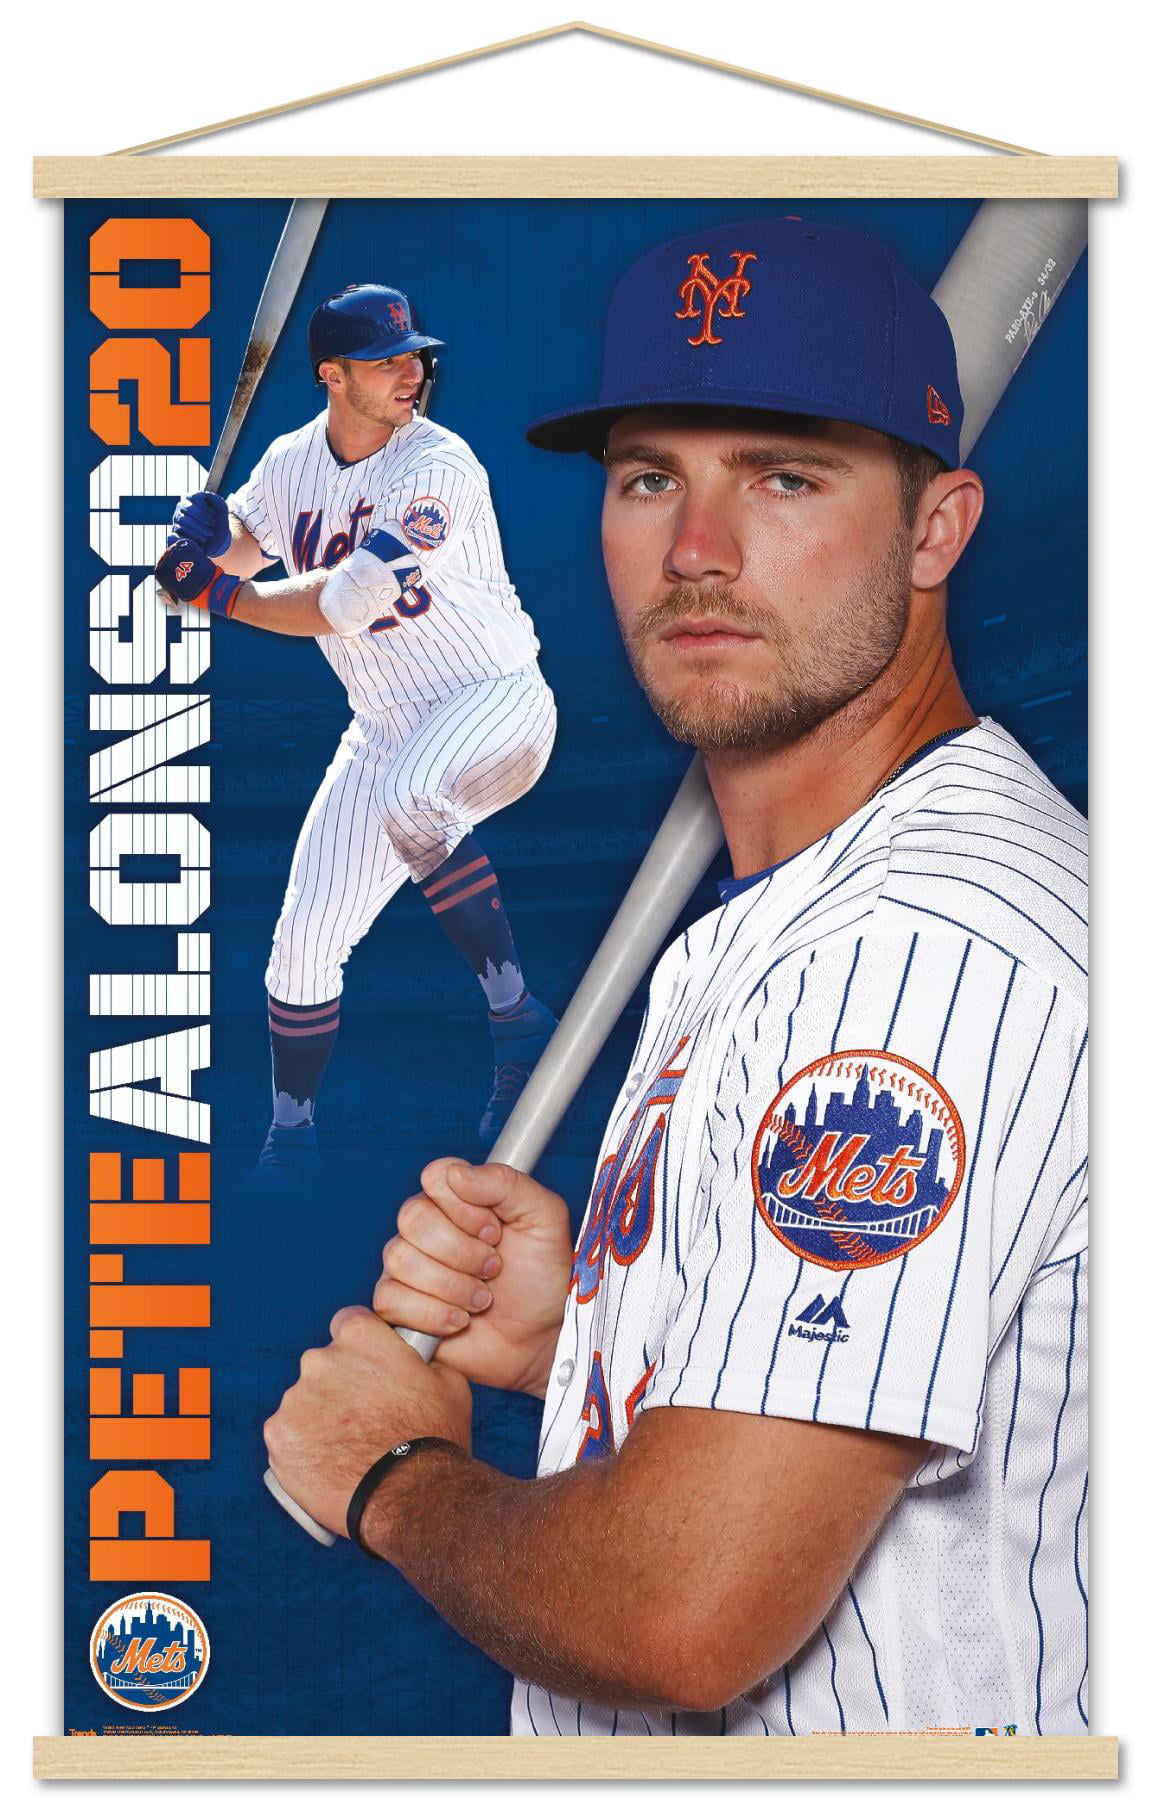 New York Mets/Complete 2020 Topps Mets Baseball Team Set! Pete Alonso! (22  Cards) Series 1 and 2